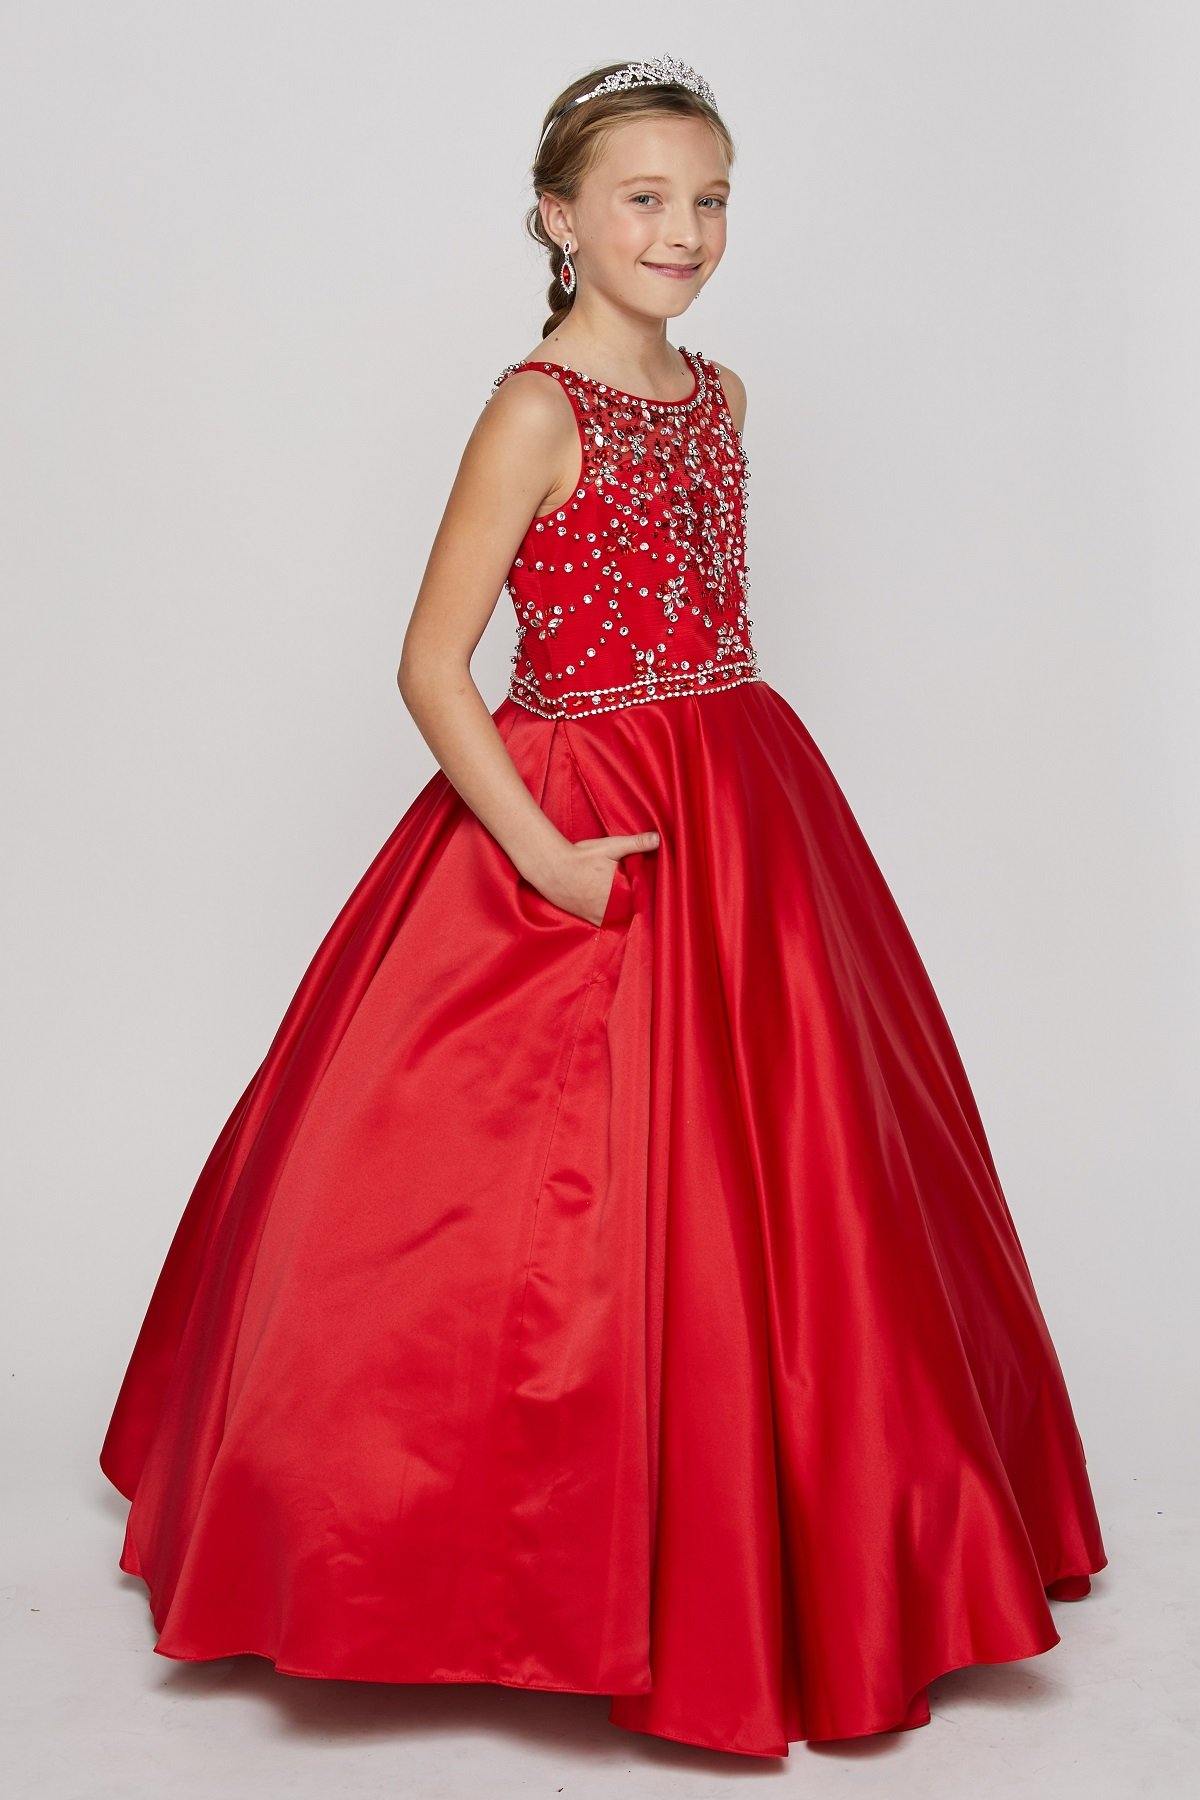 Satin and Sequin Ball Gown Flower Girl Dress - The Dress Outlet Cinderella Couture